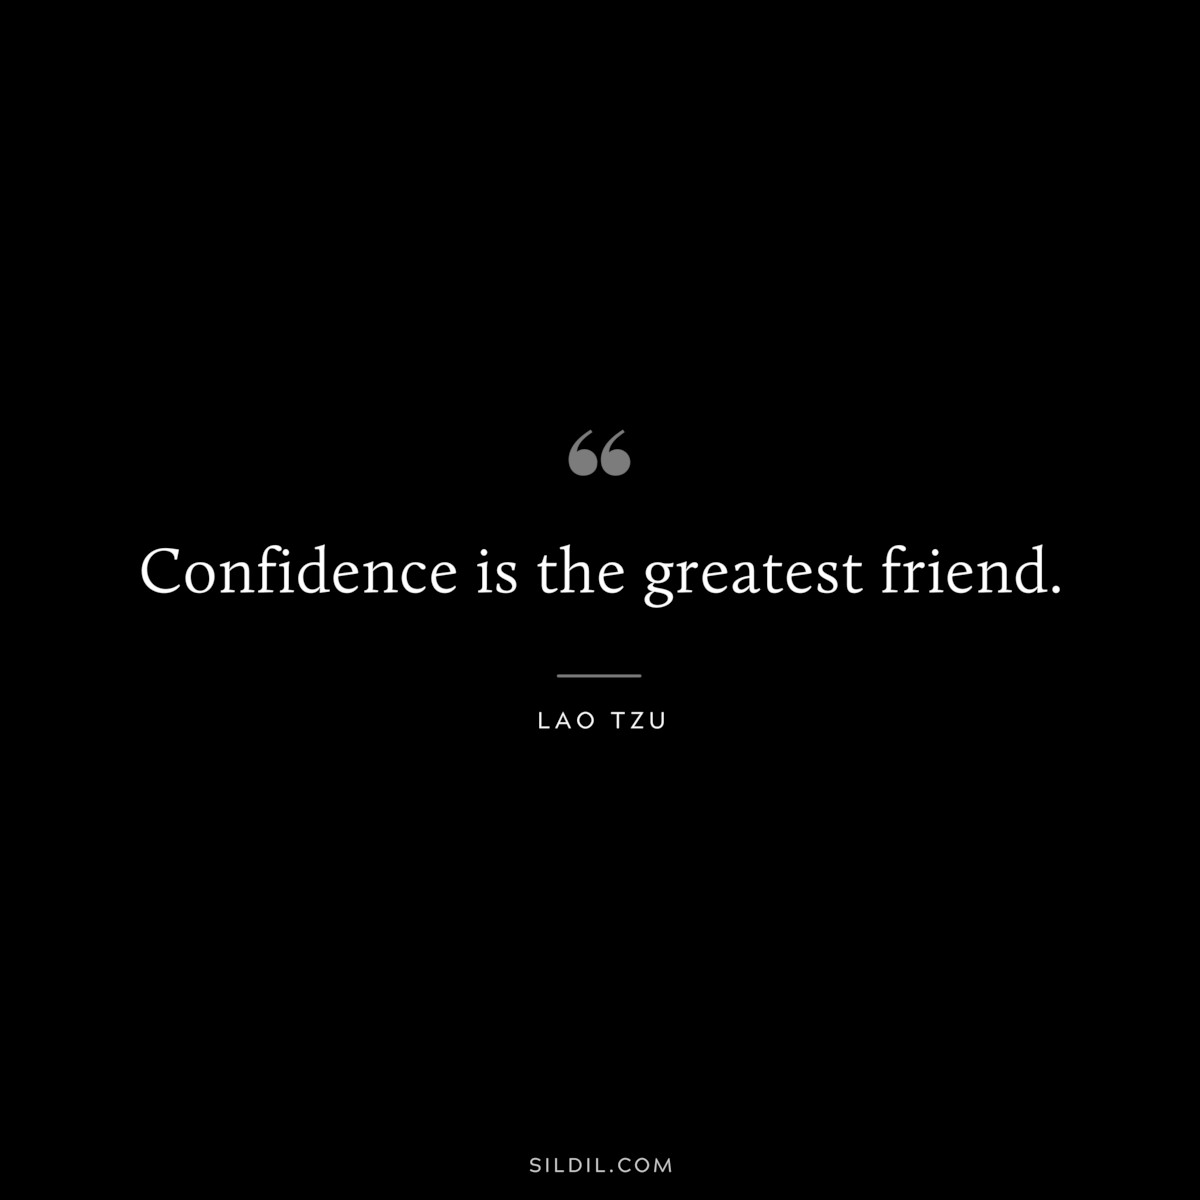 Confidence is the greatest friend. ― Lao Tzu